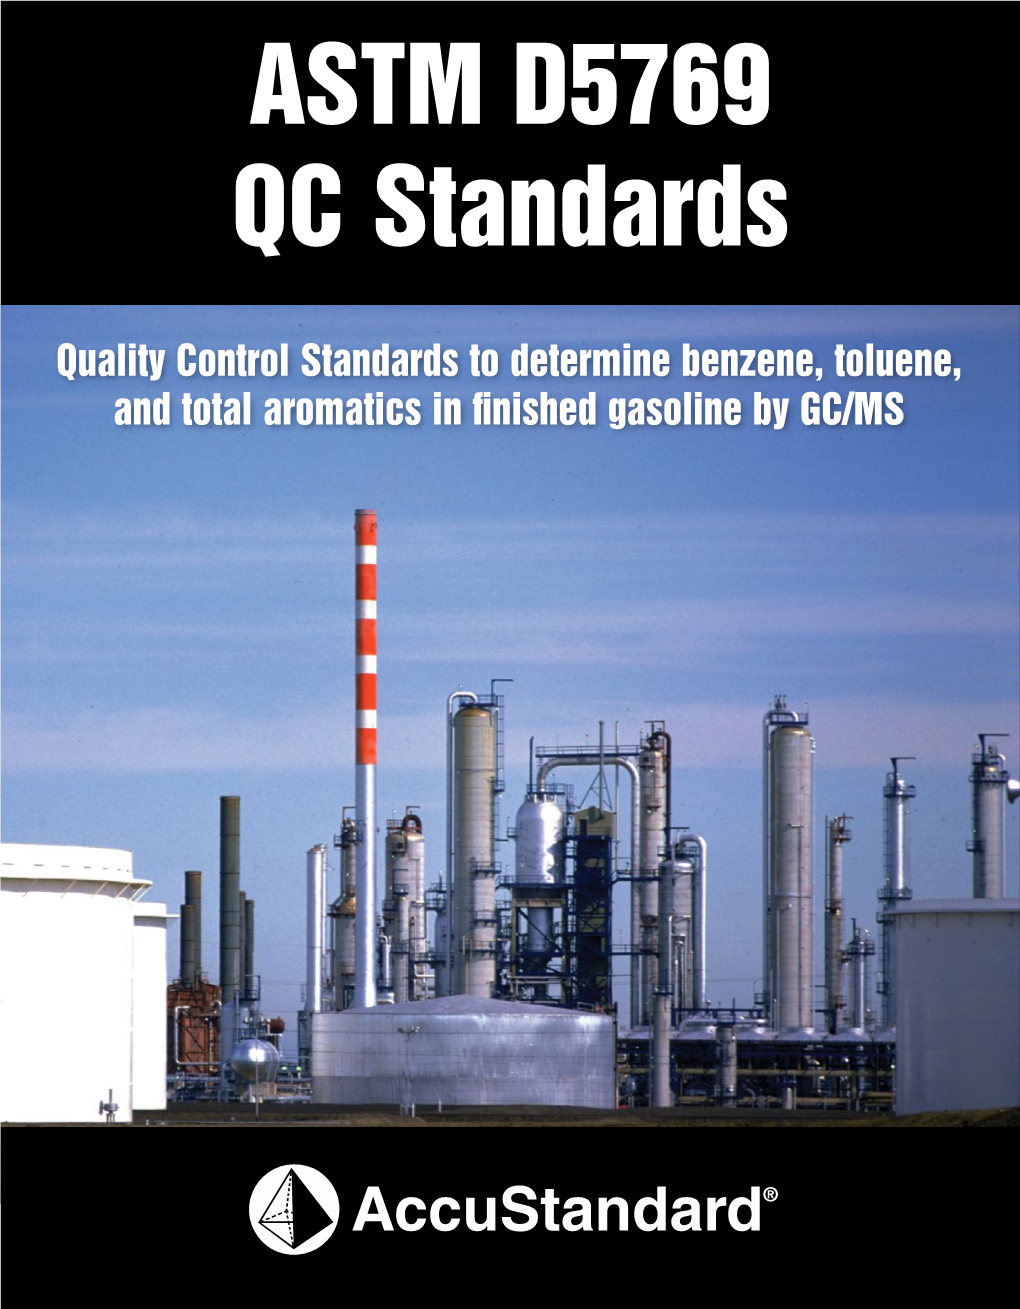 ASTM D5769 Quality Control Standards